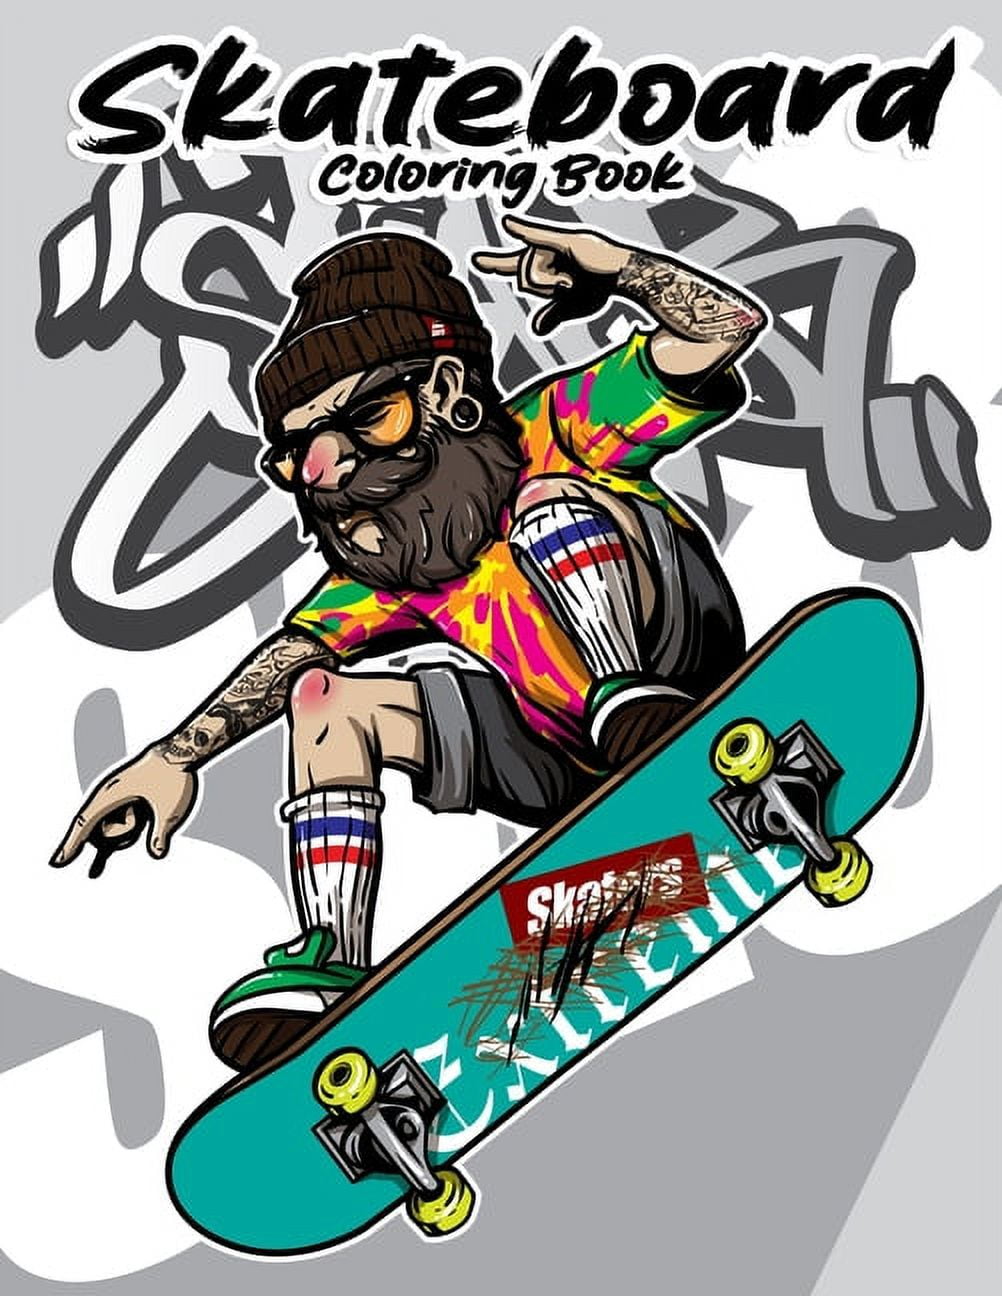 Skateboard coloring book funny skateboarding coloring book for adults teenagers and kids paperback